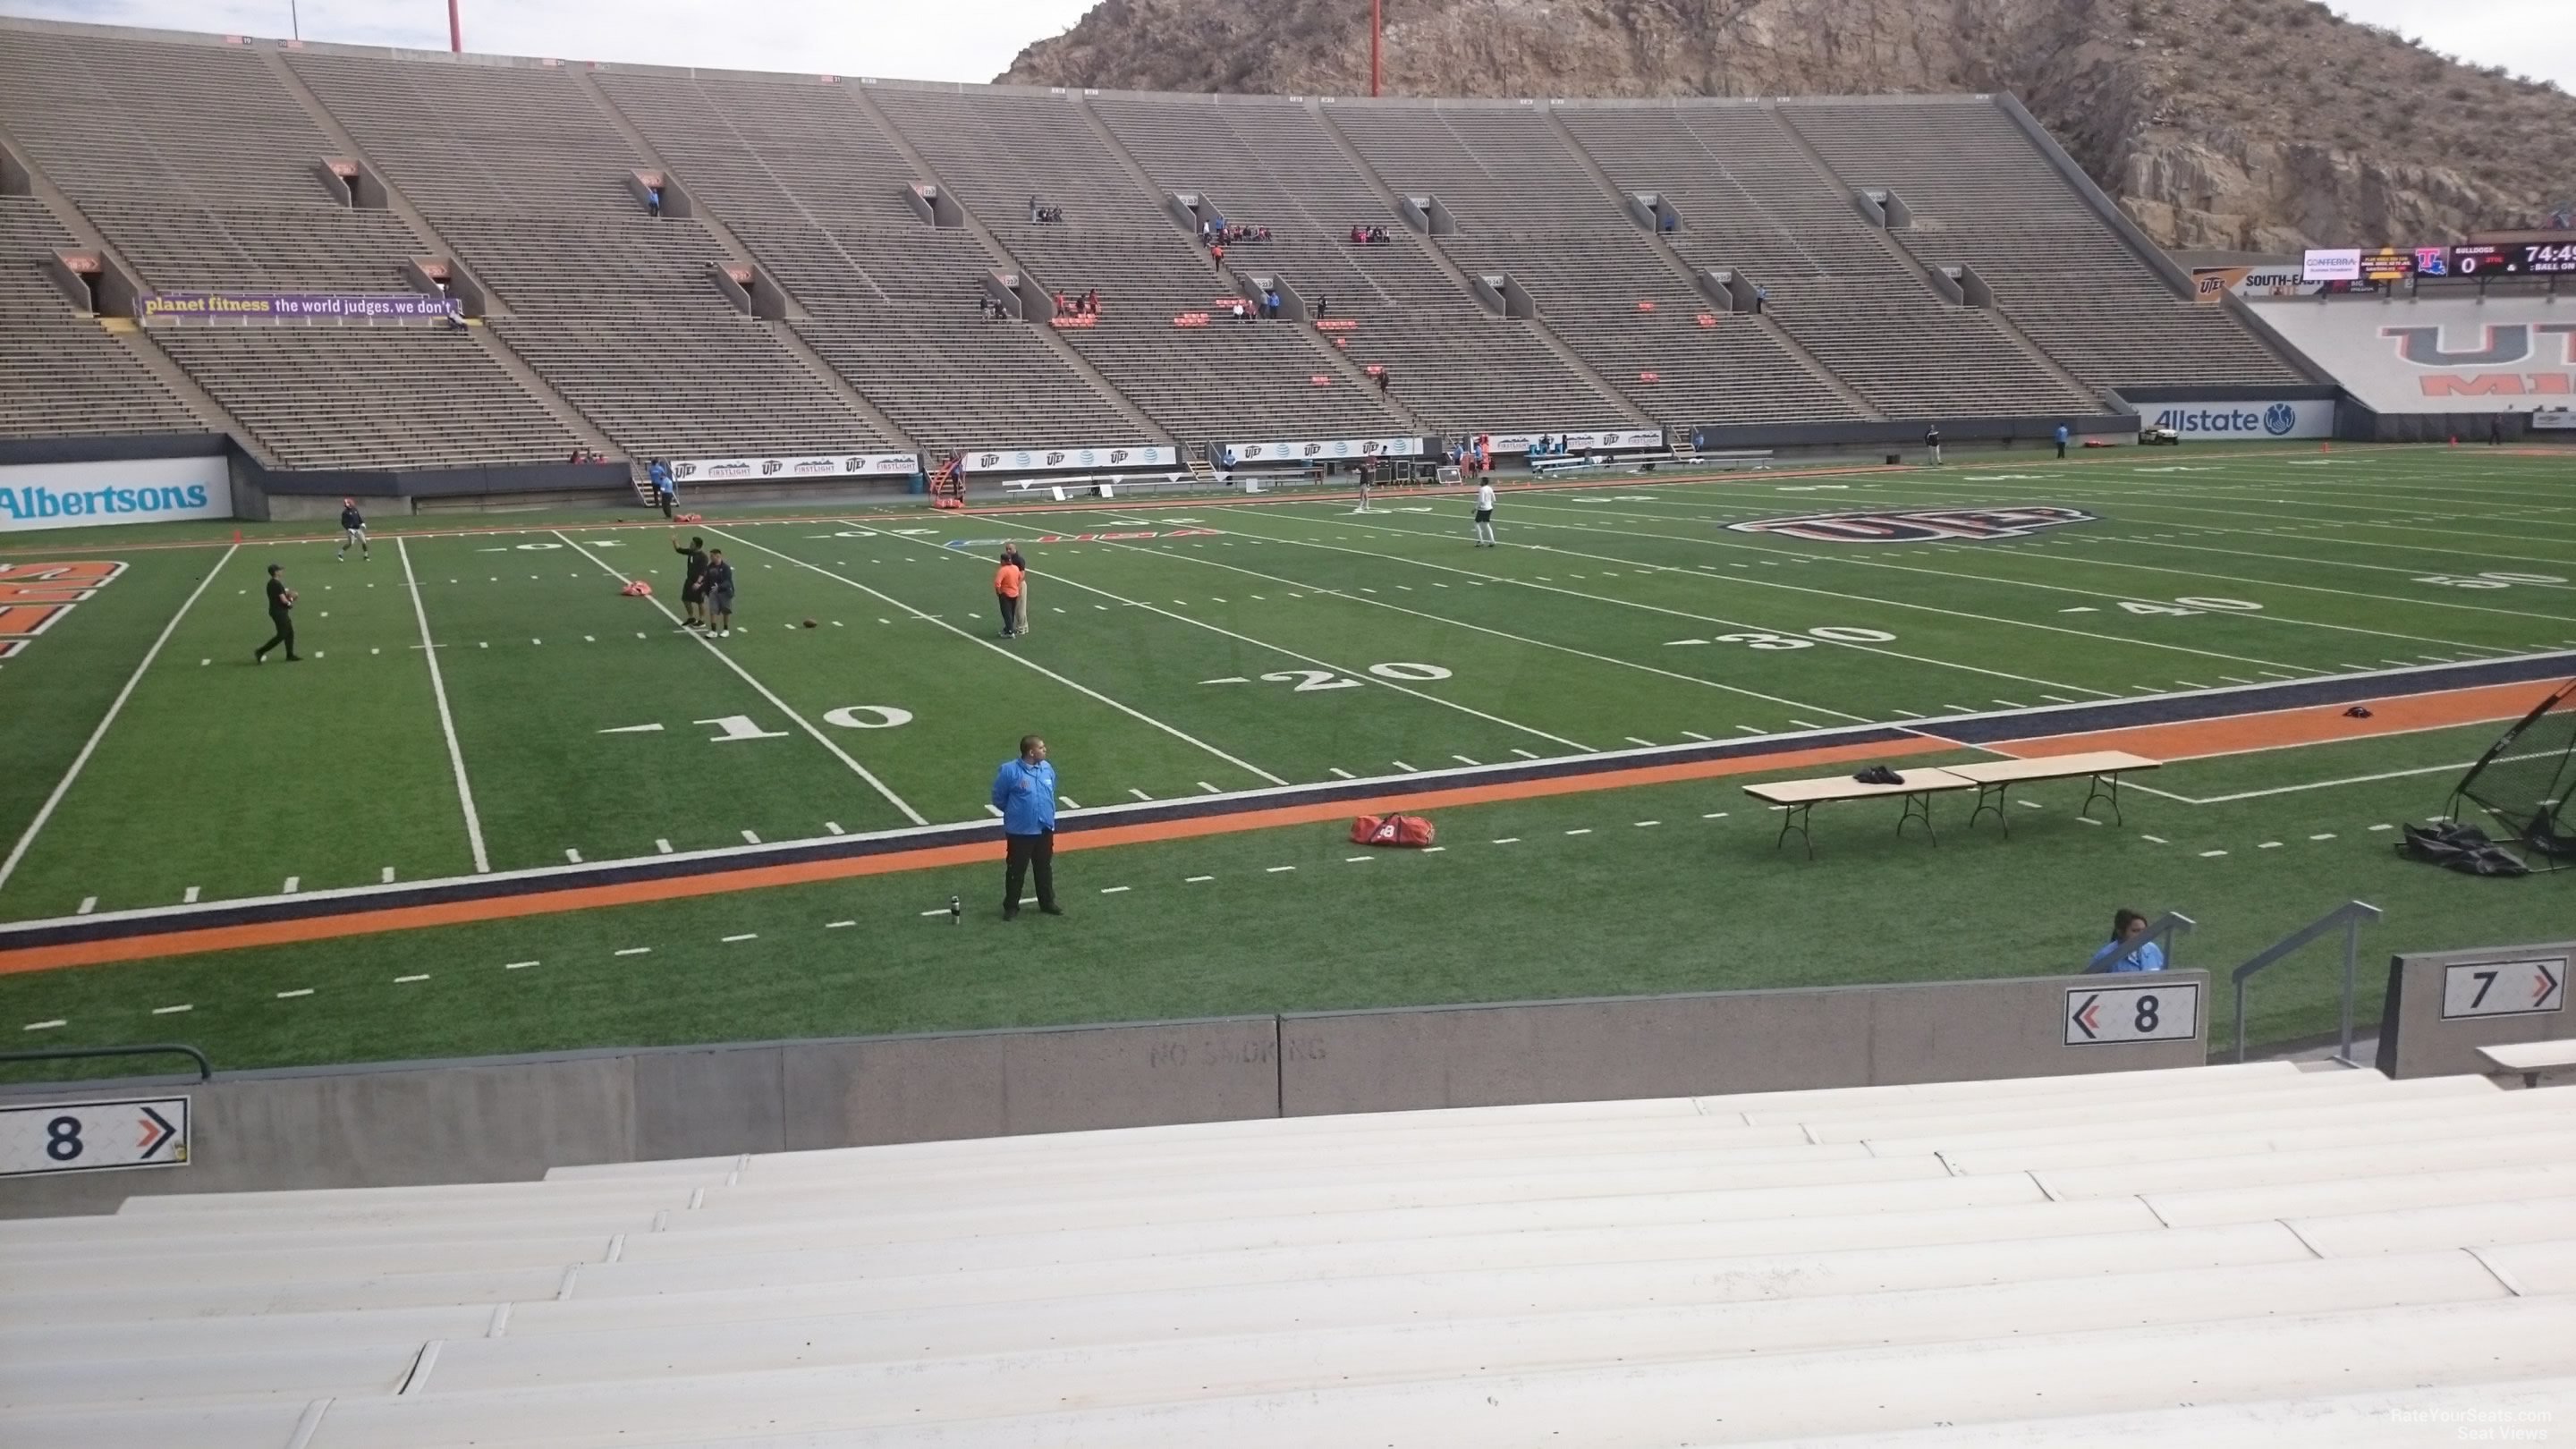 section 8, row 15 seat view  for football - sun bowl